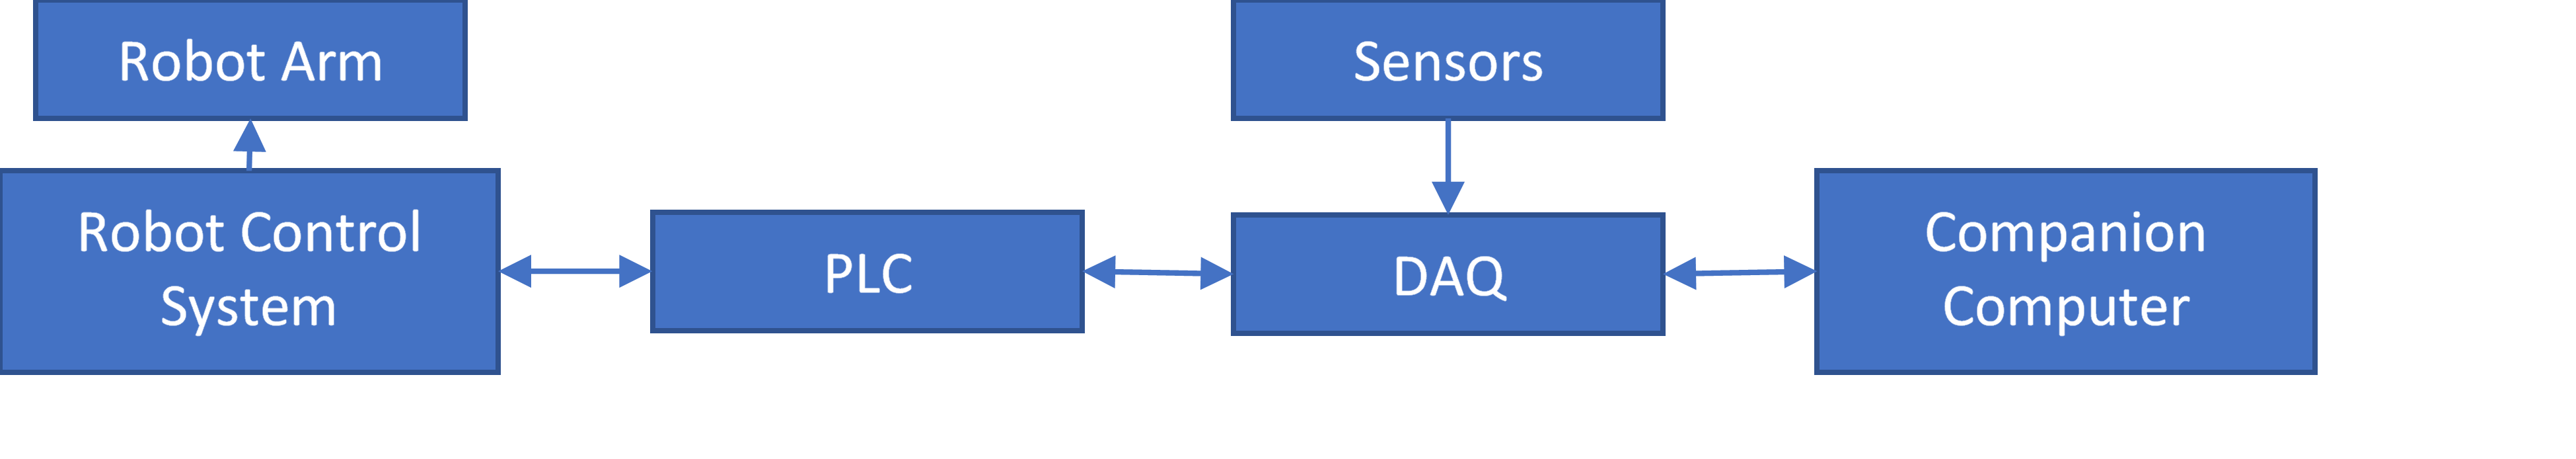 Diagram of information flow in the system